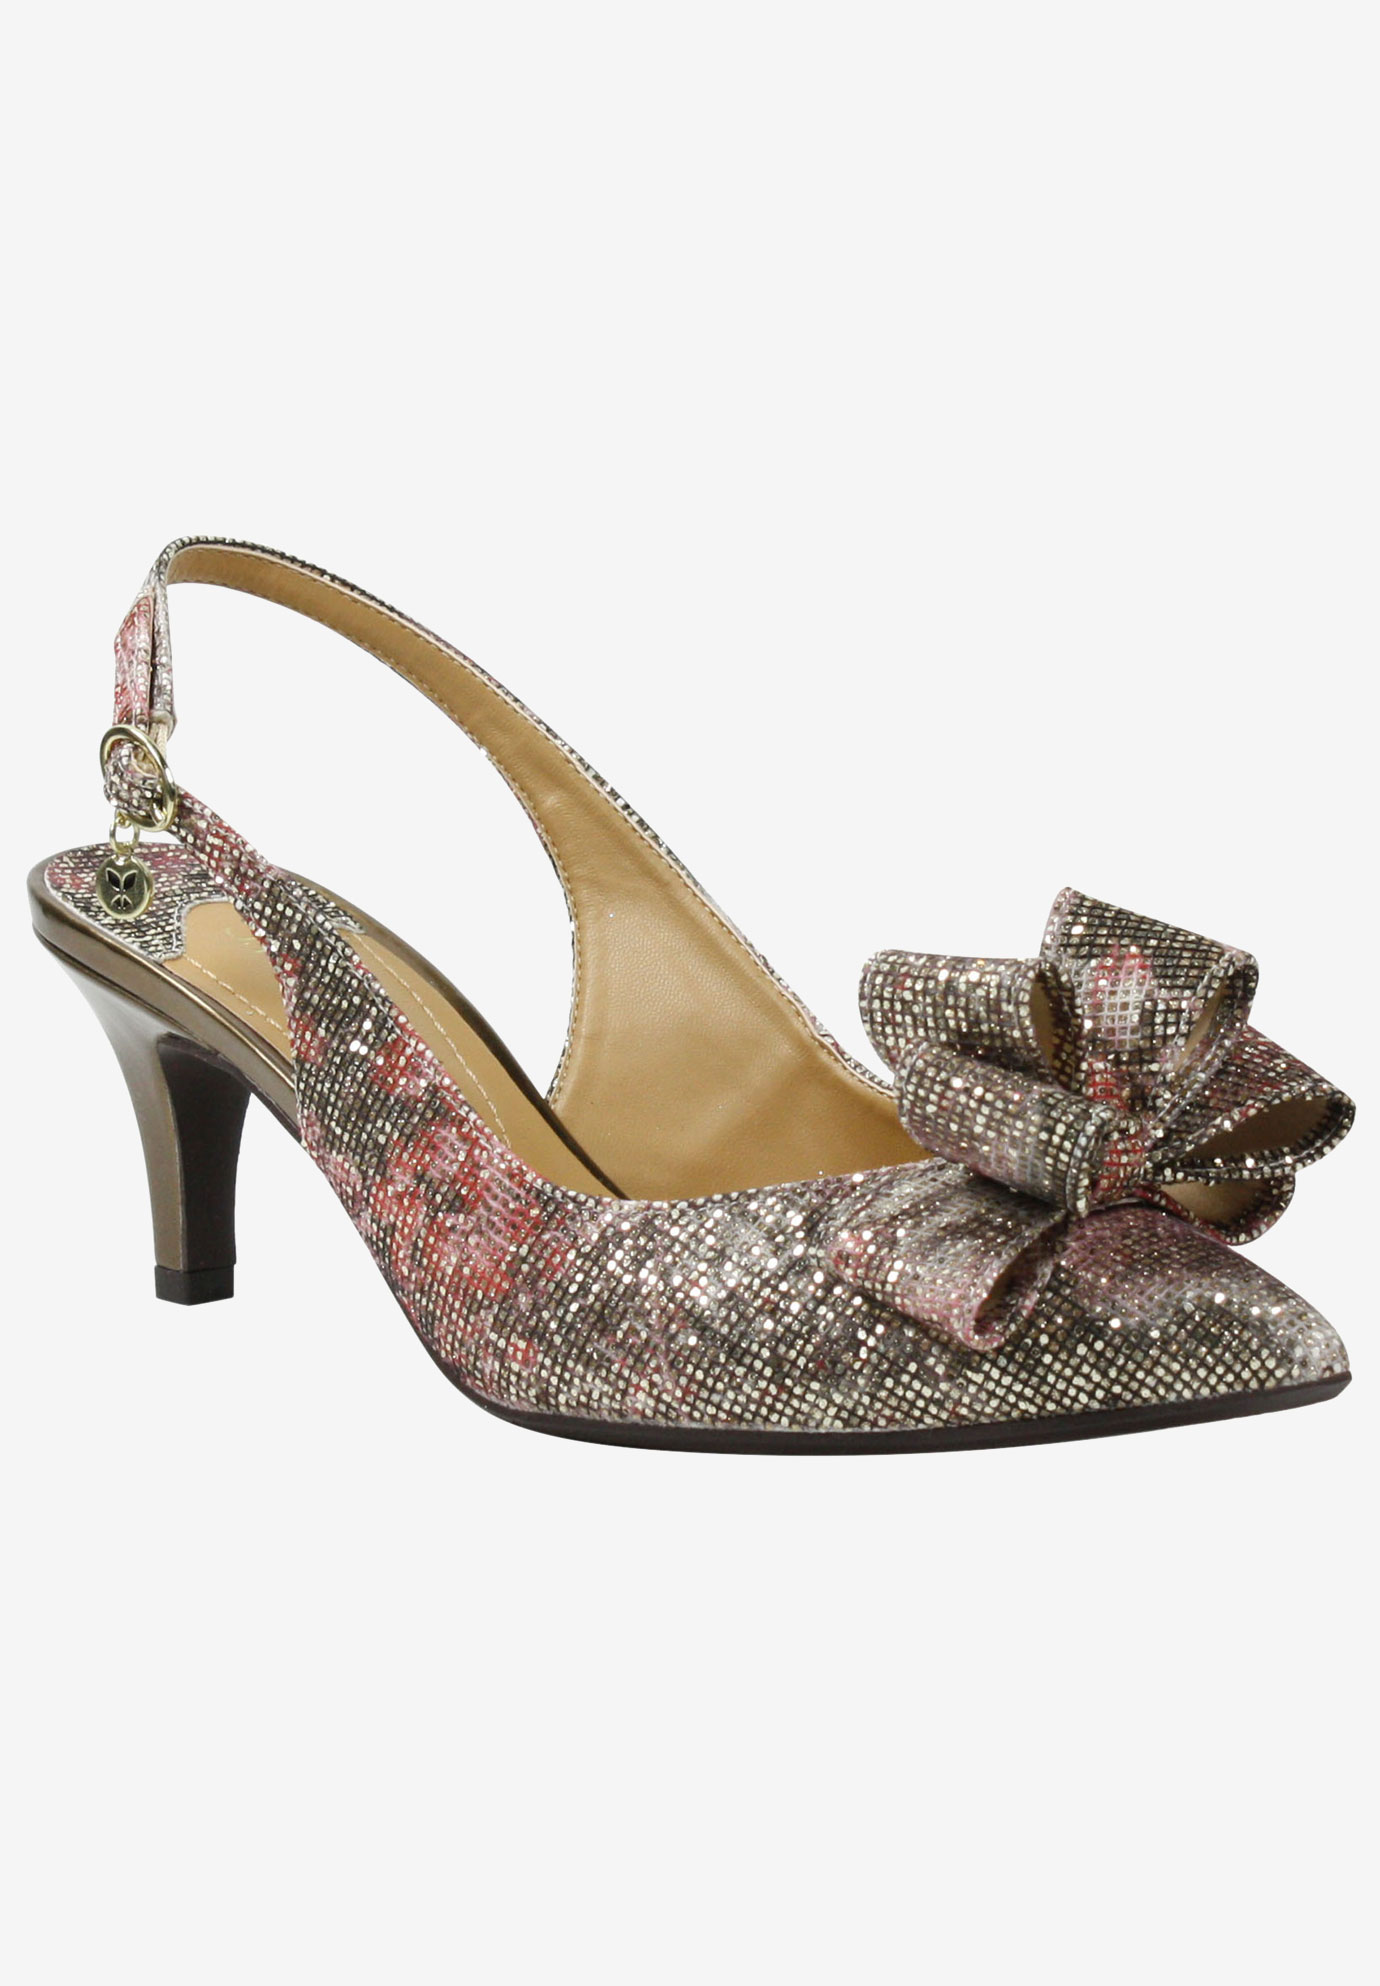 j renee special occasion shoes